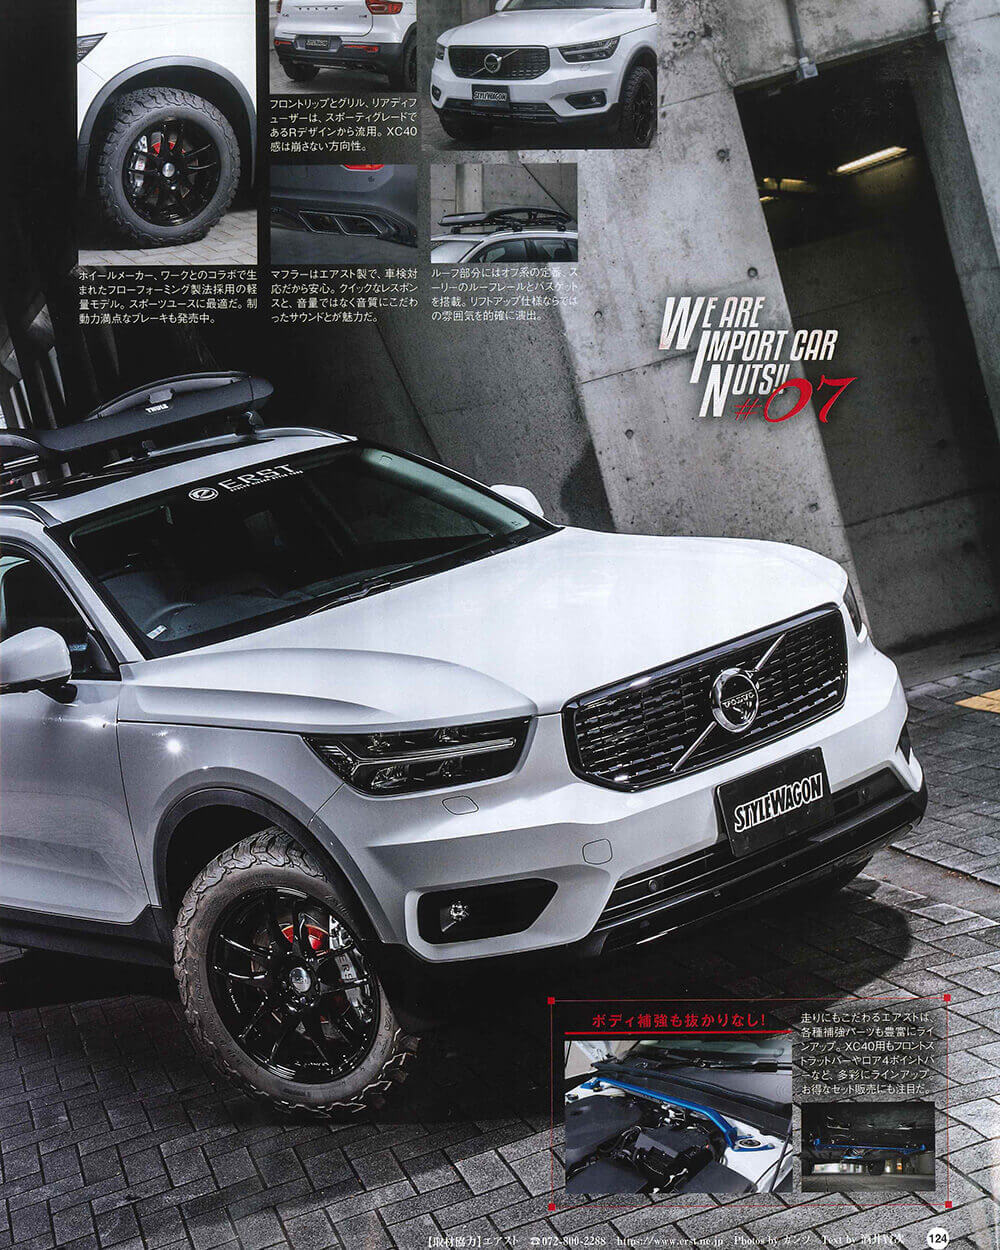 STYLE WAGON Jan. issue